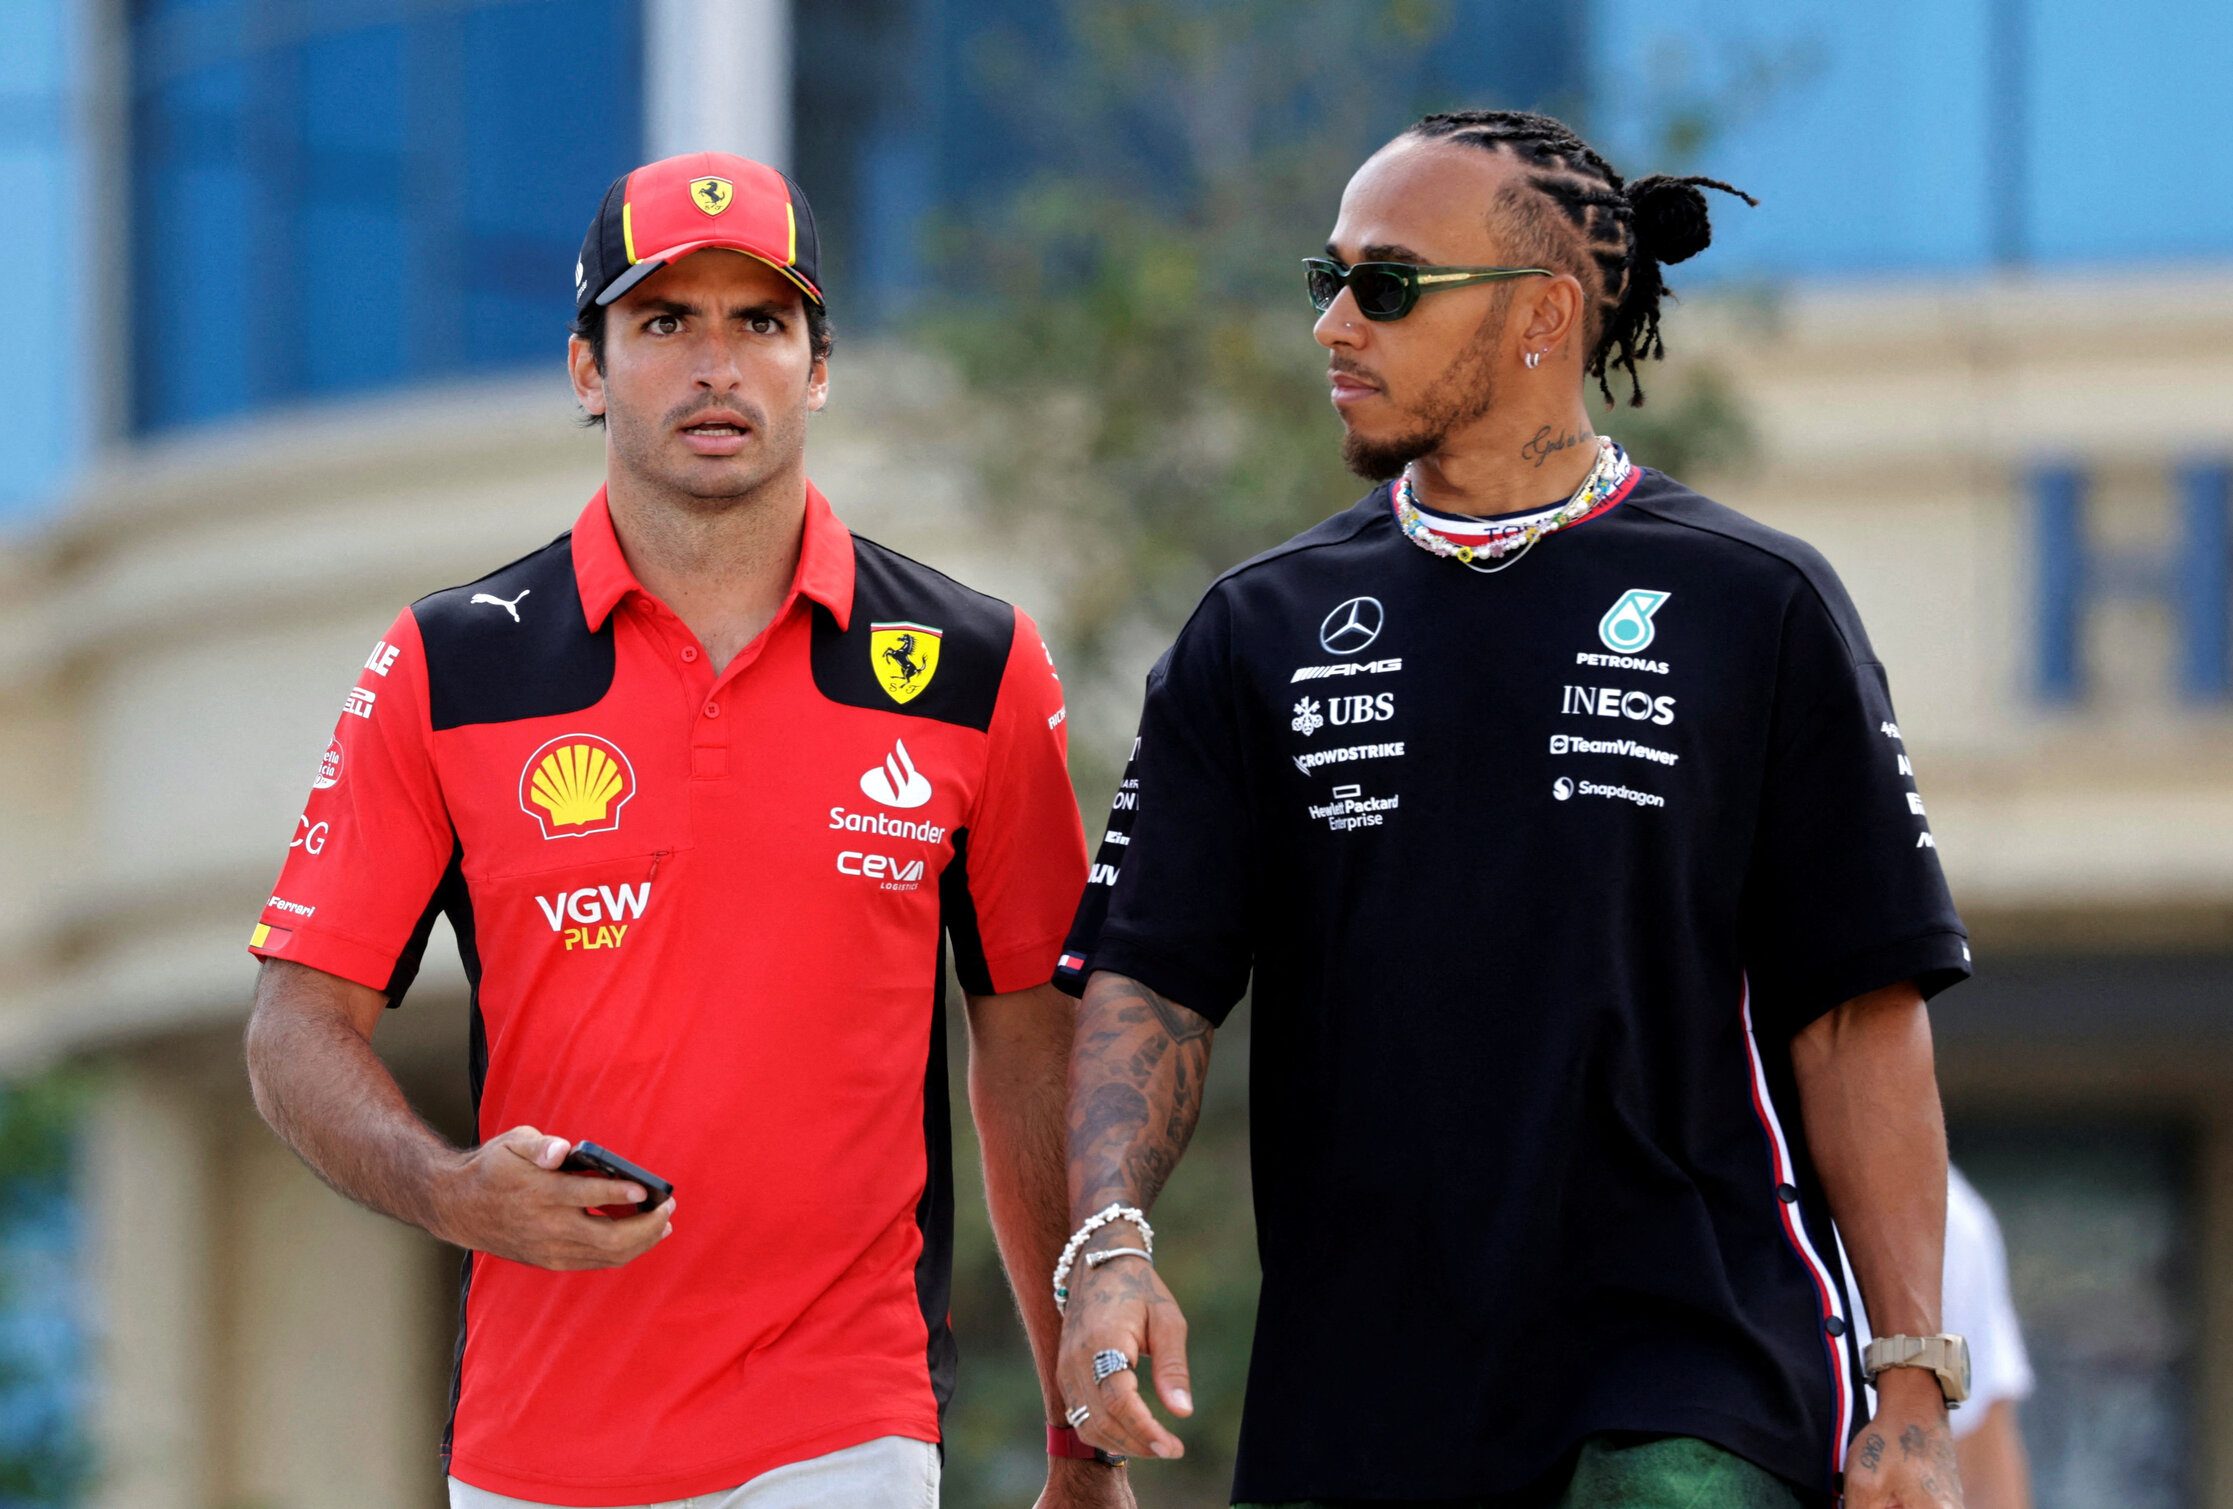 Lewis Hamilton to race for Ferrari from 2025 in shock switch